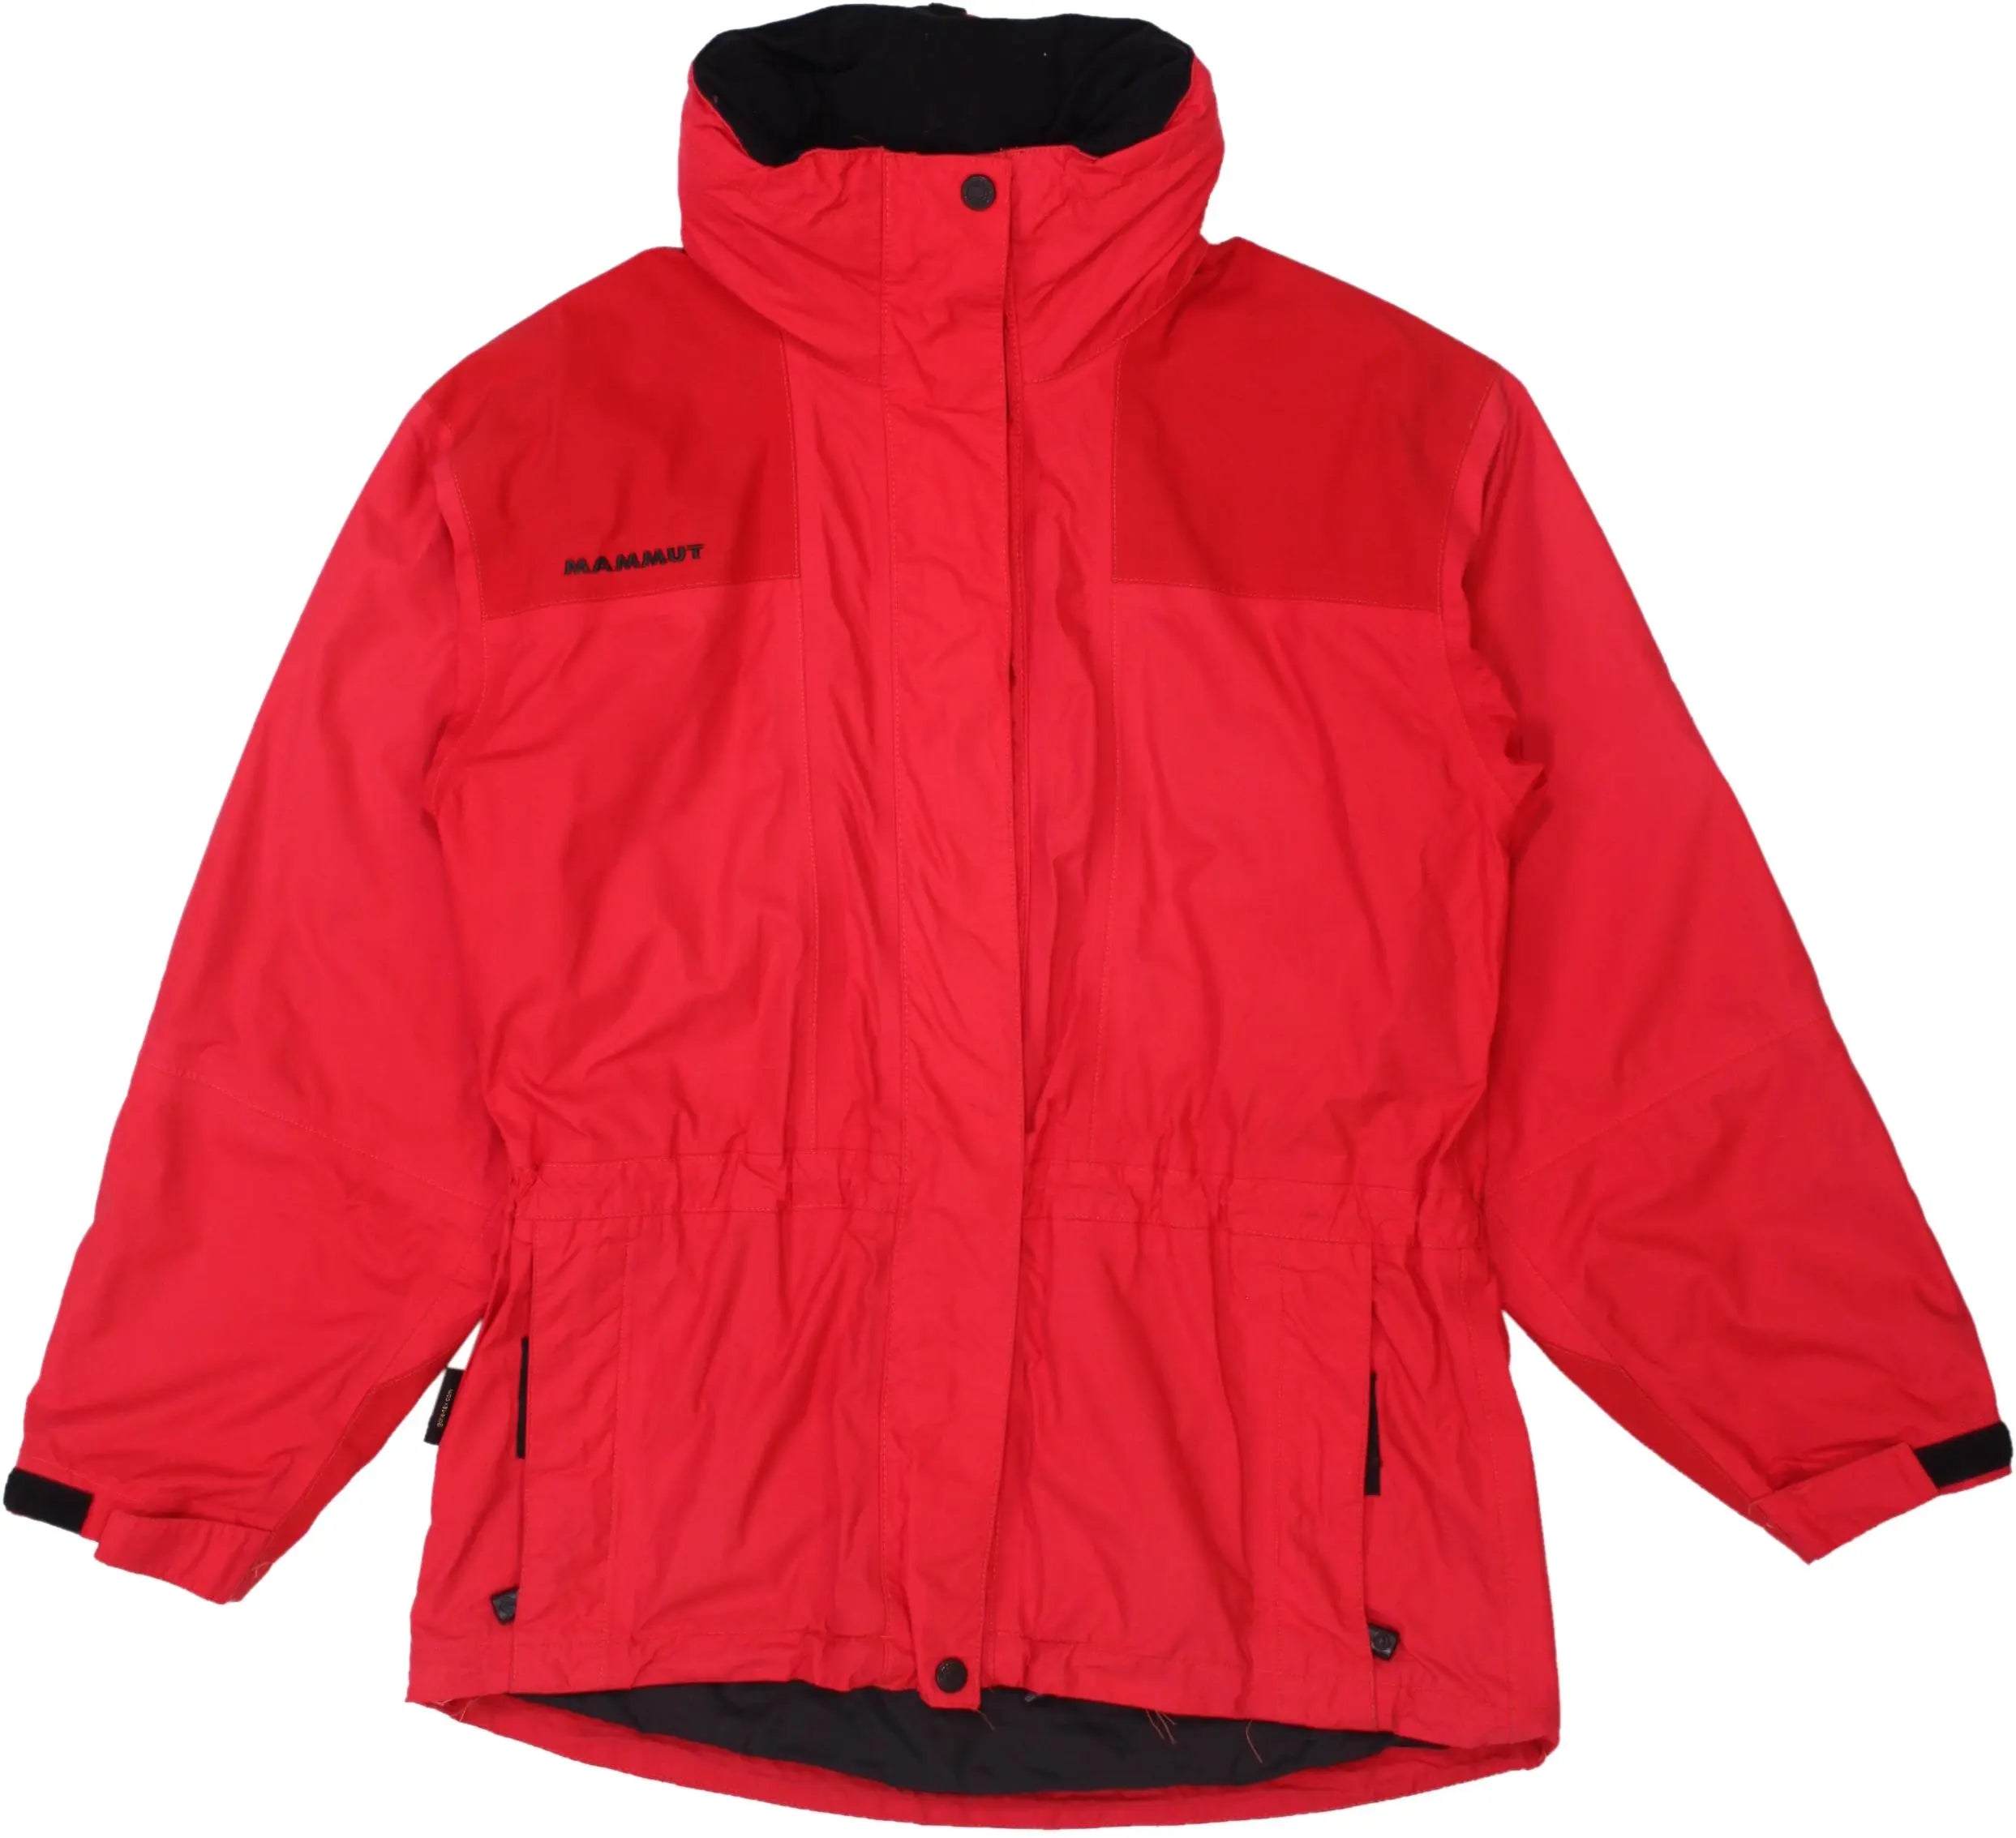 Mammut - Gore-Tex Jacket by Mammut- ThriftTale.com - Vintage and second handclothing